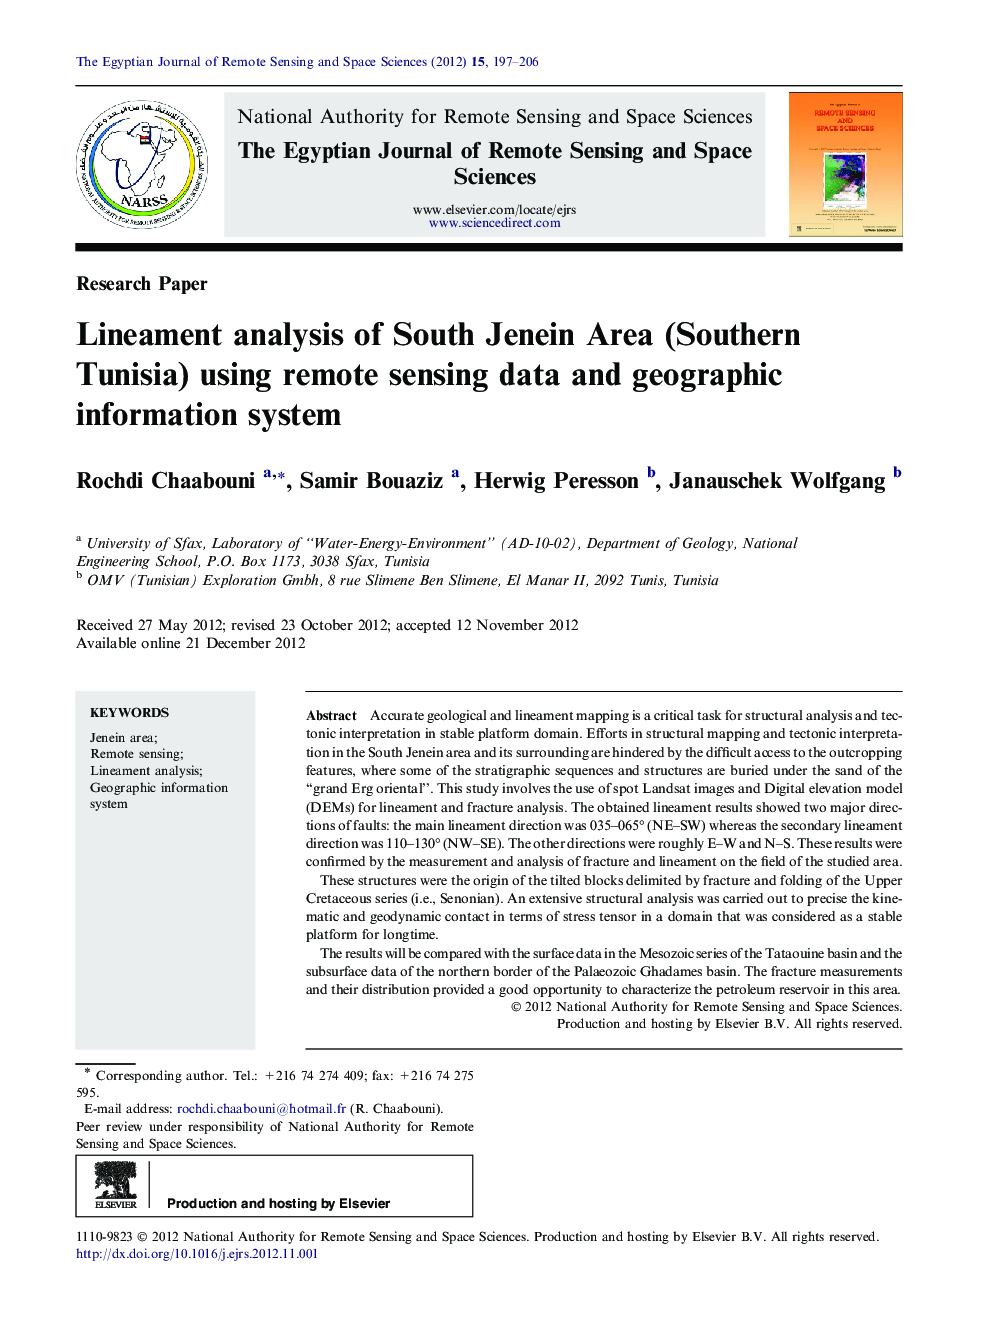 Lineament analysis of South Jenein Area (Southern Tunisia) using remote sensing data and geographic information system 